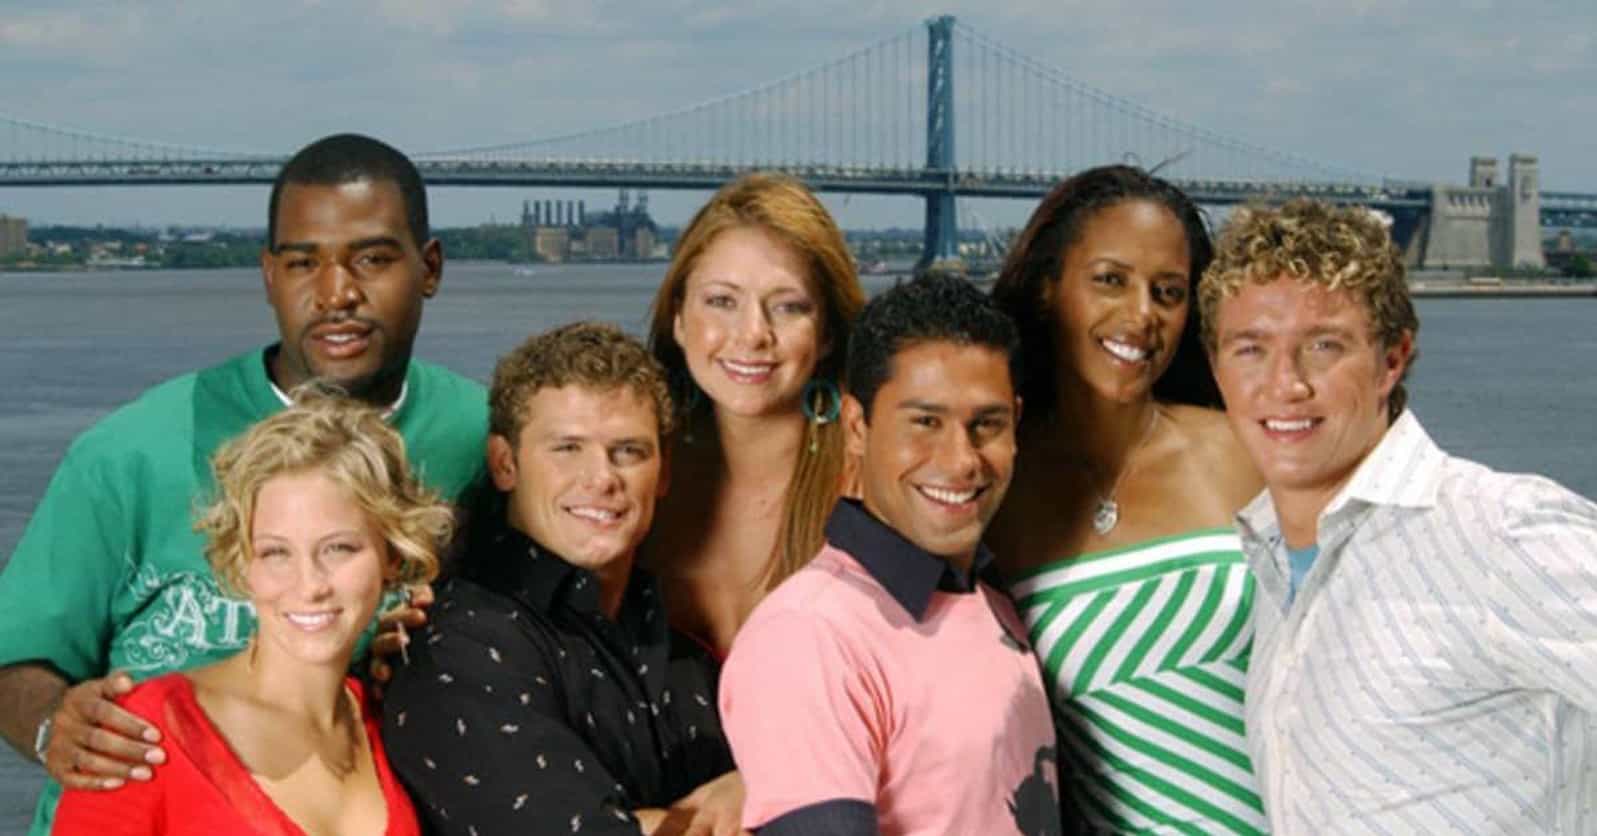 Whatever Happened To The Most Memorable People From MTV's 'The Real World'?